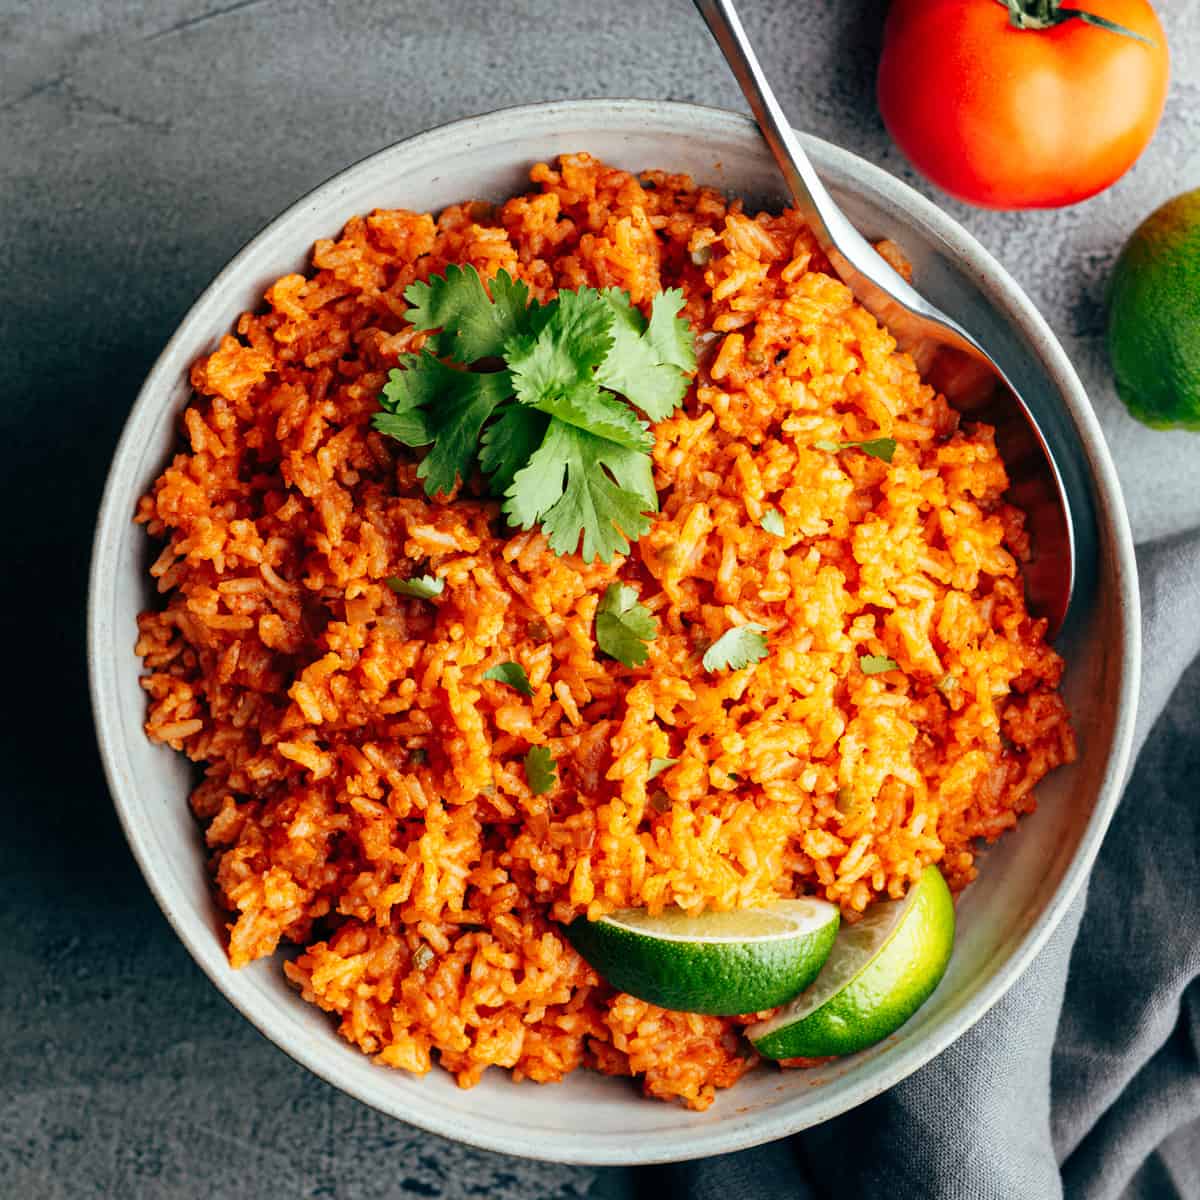 Mexican rice in a bowl with tomatoes and limes.